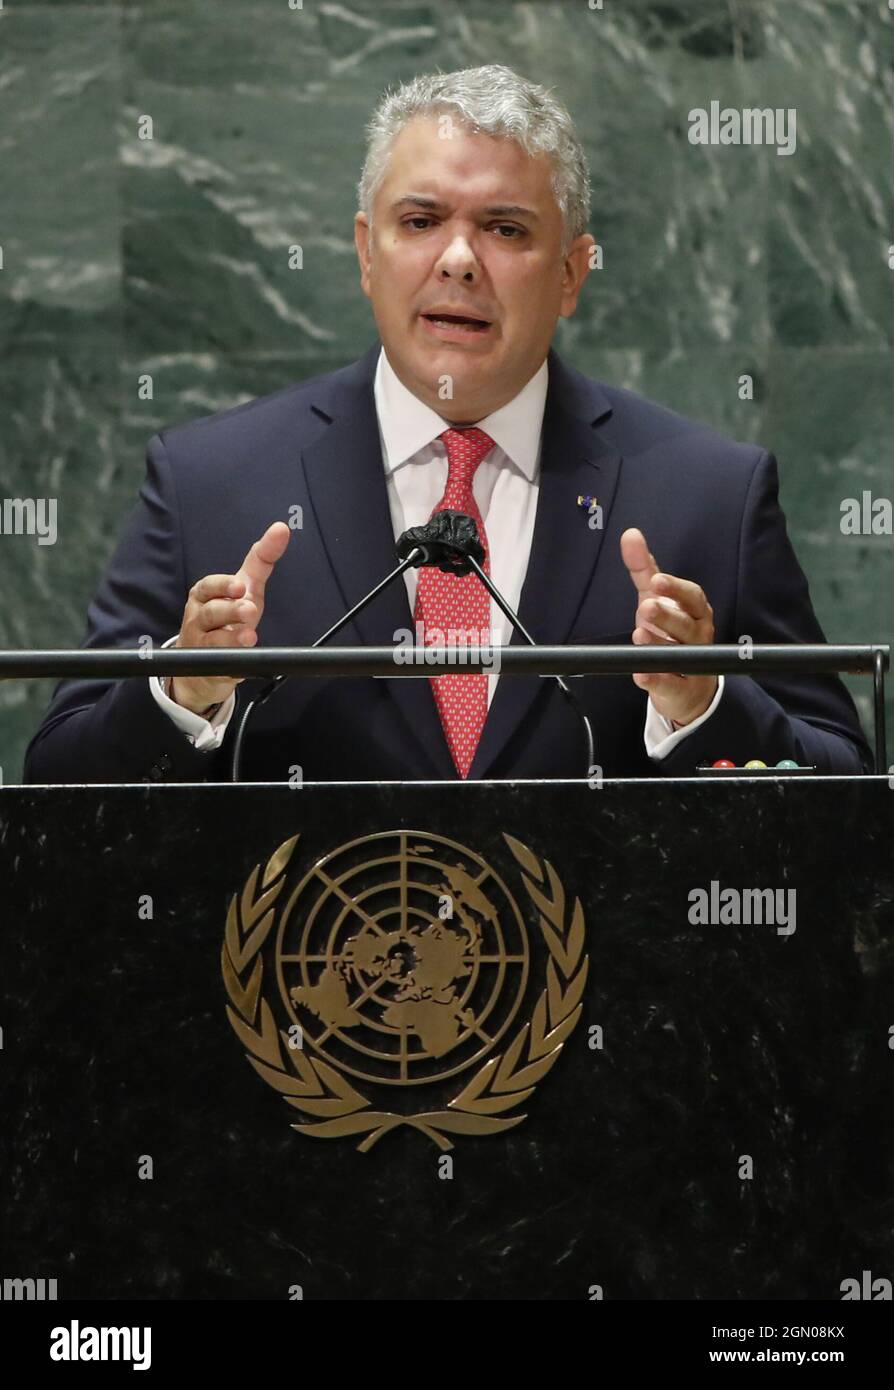 New York, United States. 21st Sep, 2021. Colombia's President Ivan Duque addresses the 76th Session of the U.N. General Assembly on Tuesday, Sept. 21, 2021 in New York City. (Pool Photo by John Minchillo/UPI) Credit: UPI/Alamy Live News Stock Photo